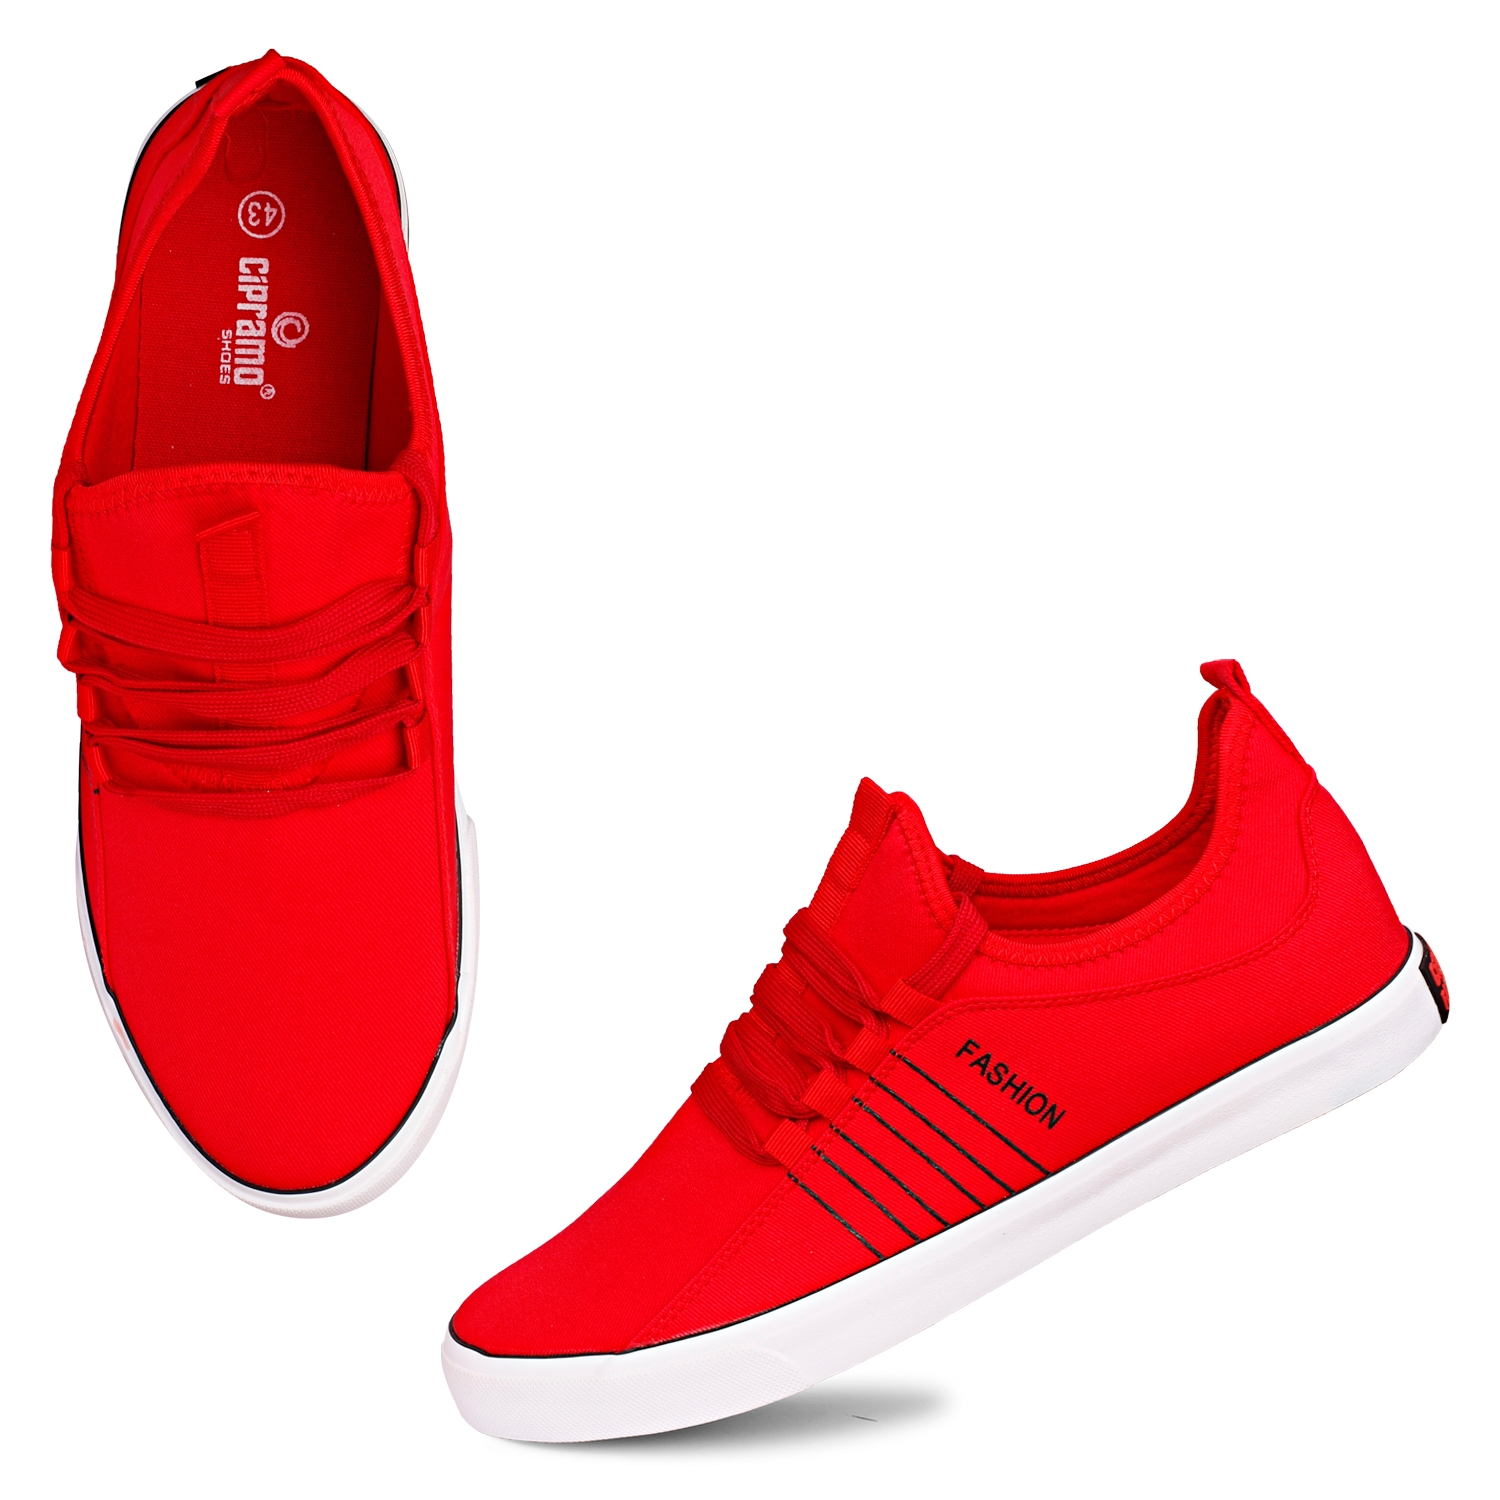 Cipramo | CIPRAMO SPORTS CANVAS Red Latest Stylish Casual Lace up Lightweight Sneakers for Running,Walking, Gym For Men